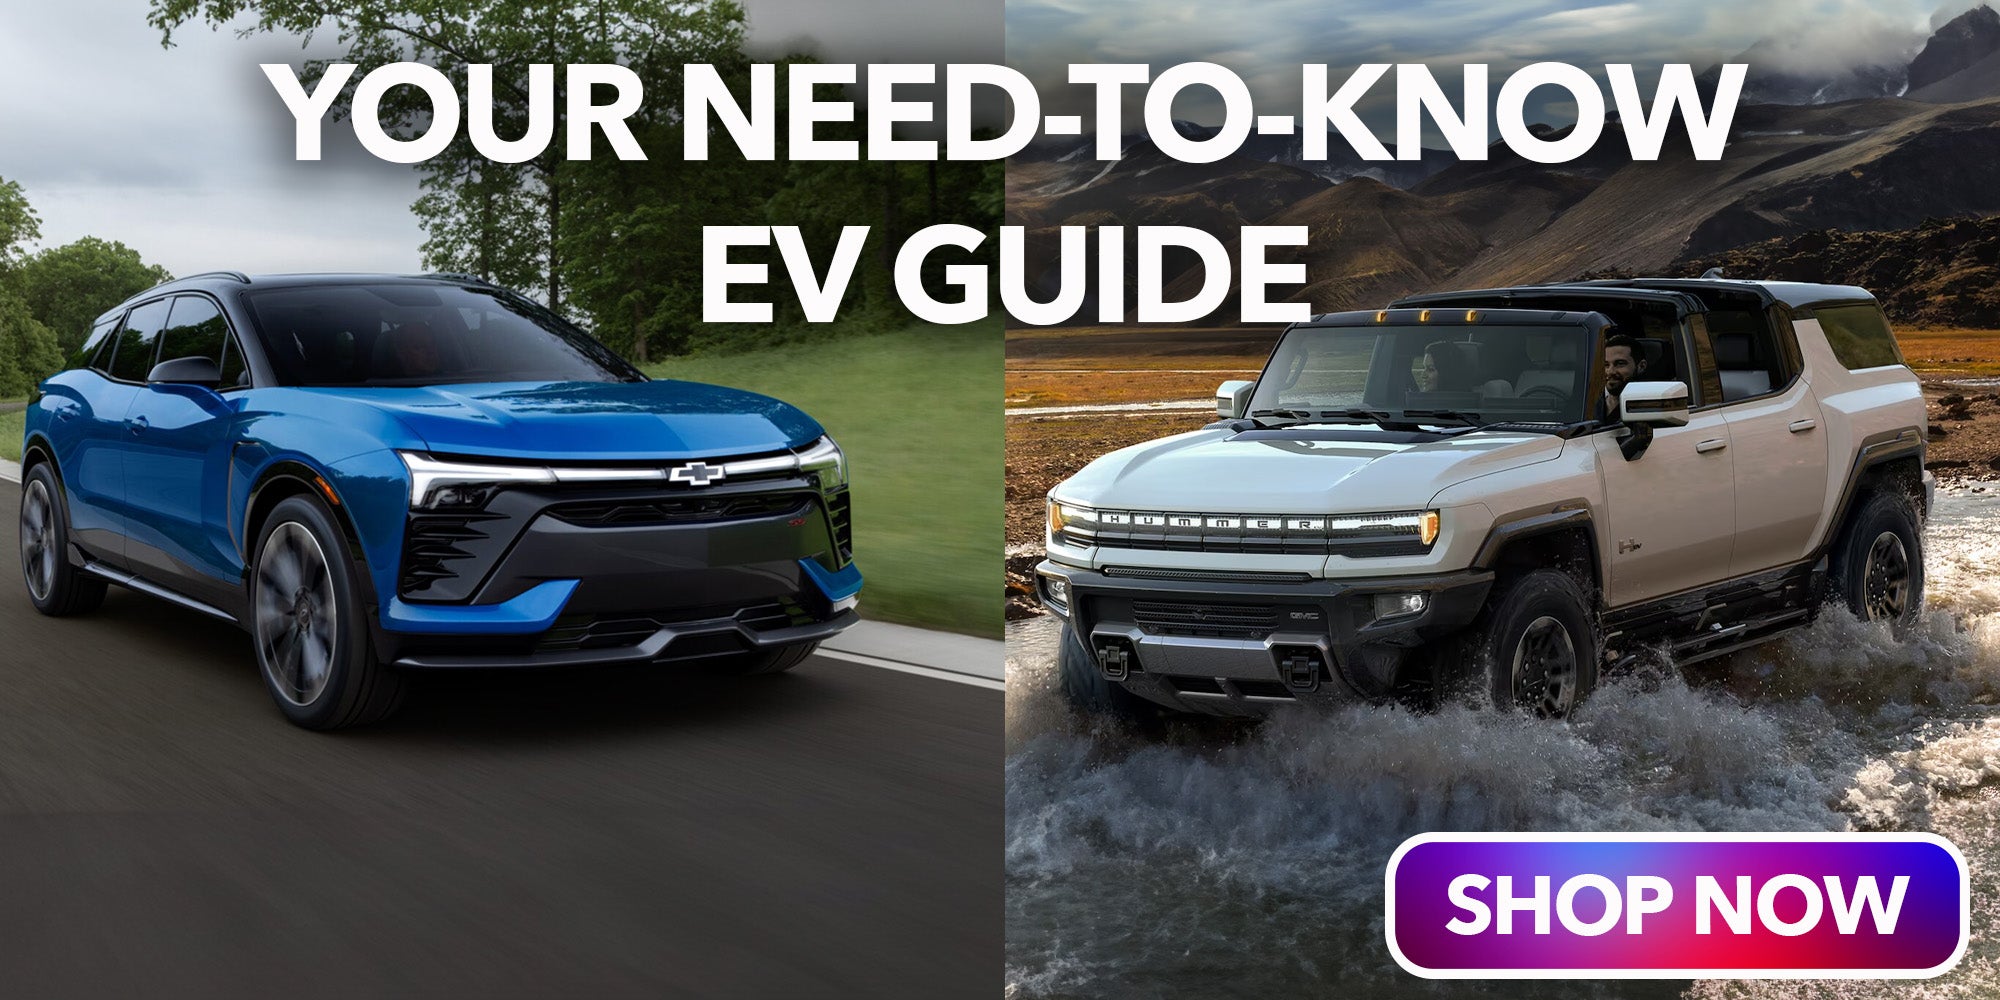 YOUR NEED-TO-KNOW EV GUIDE